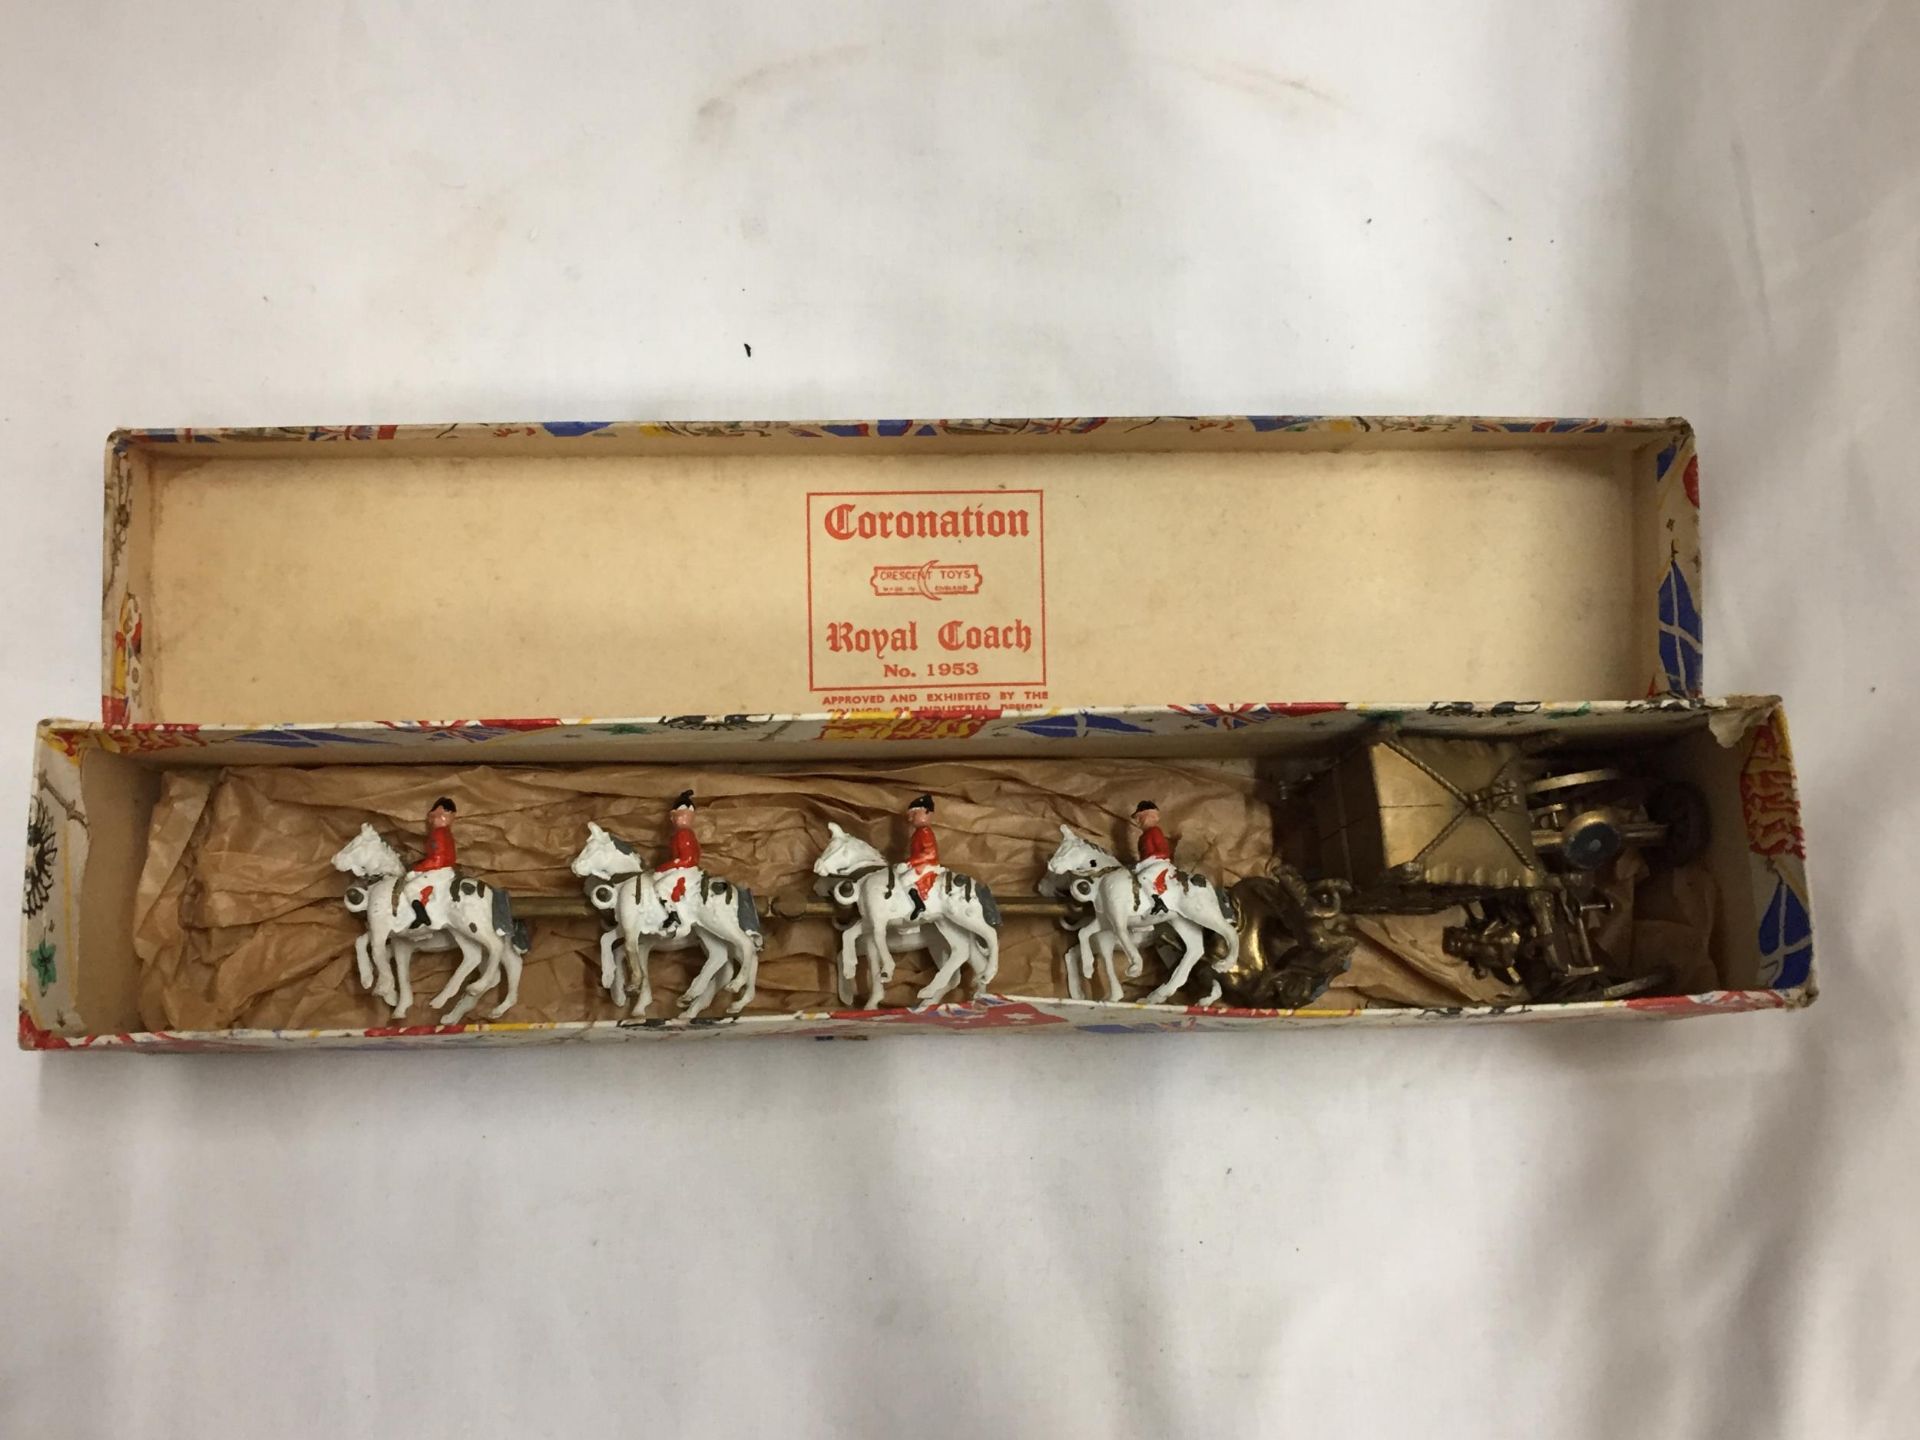 A VINTAGE CRESCENT TOYS CORONATION ROYAL COACH WITH HORSES NO. 1953